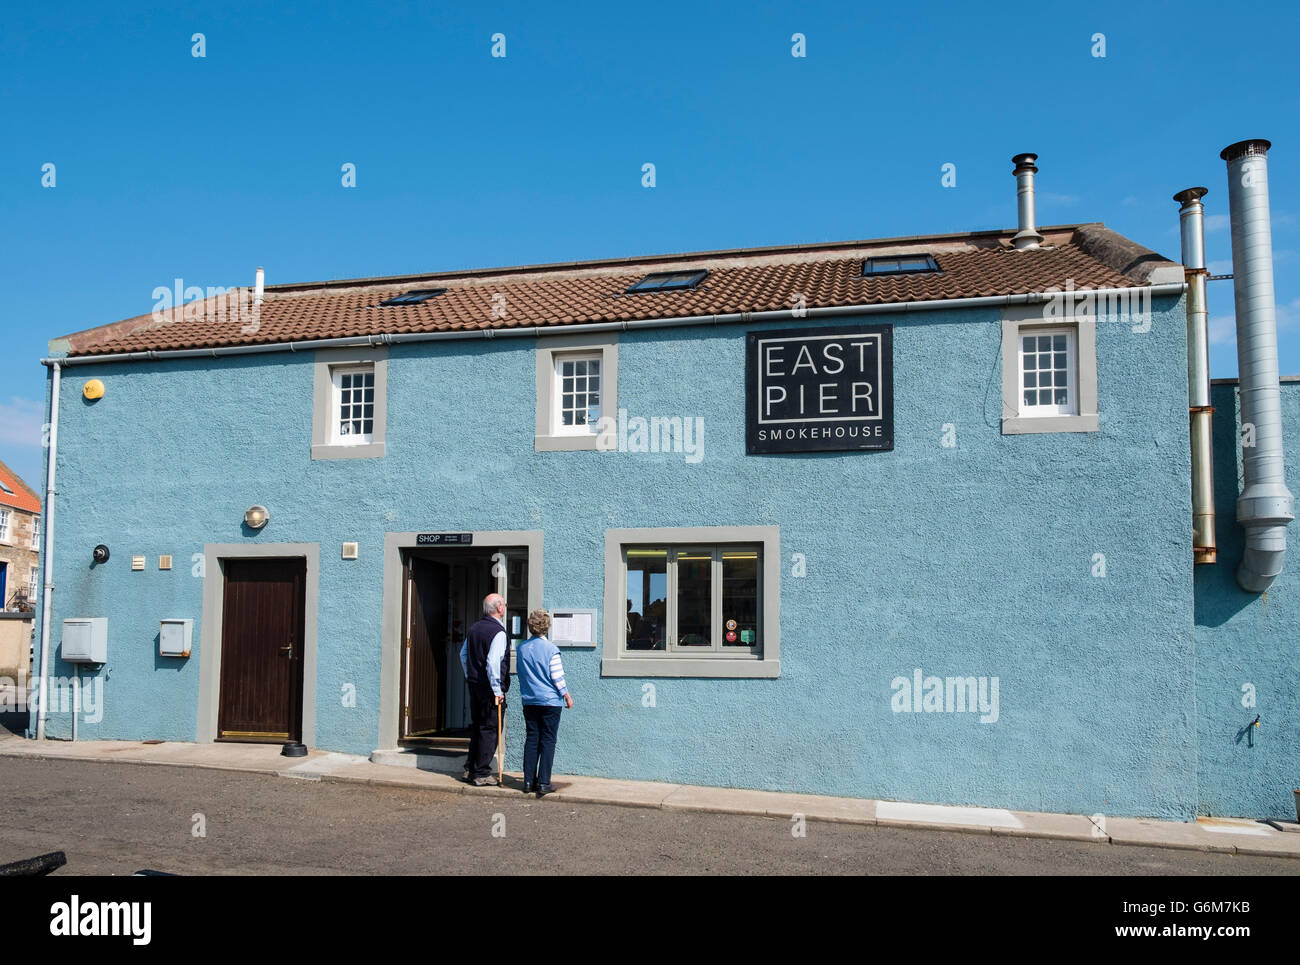 East Pier Smokehouse cafe and restaurant in St Monans village in East Neuk, Fife, Scotland, United Kingdom, Stock Photo